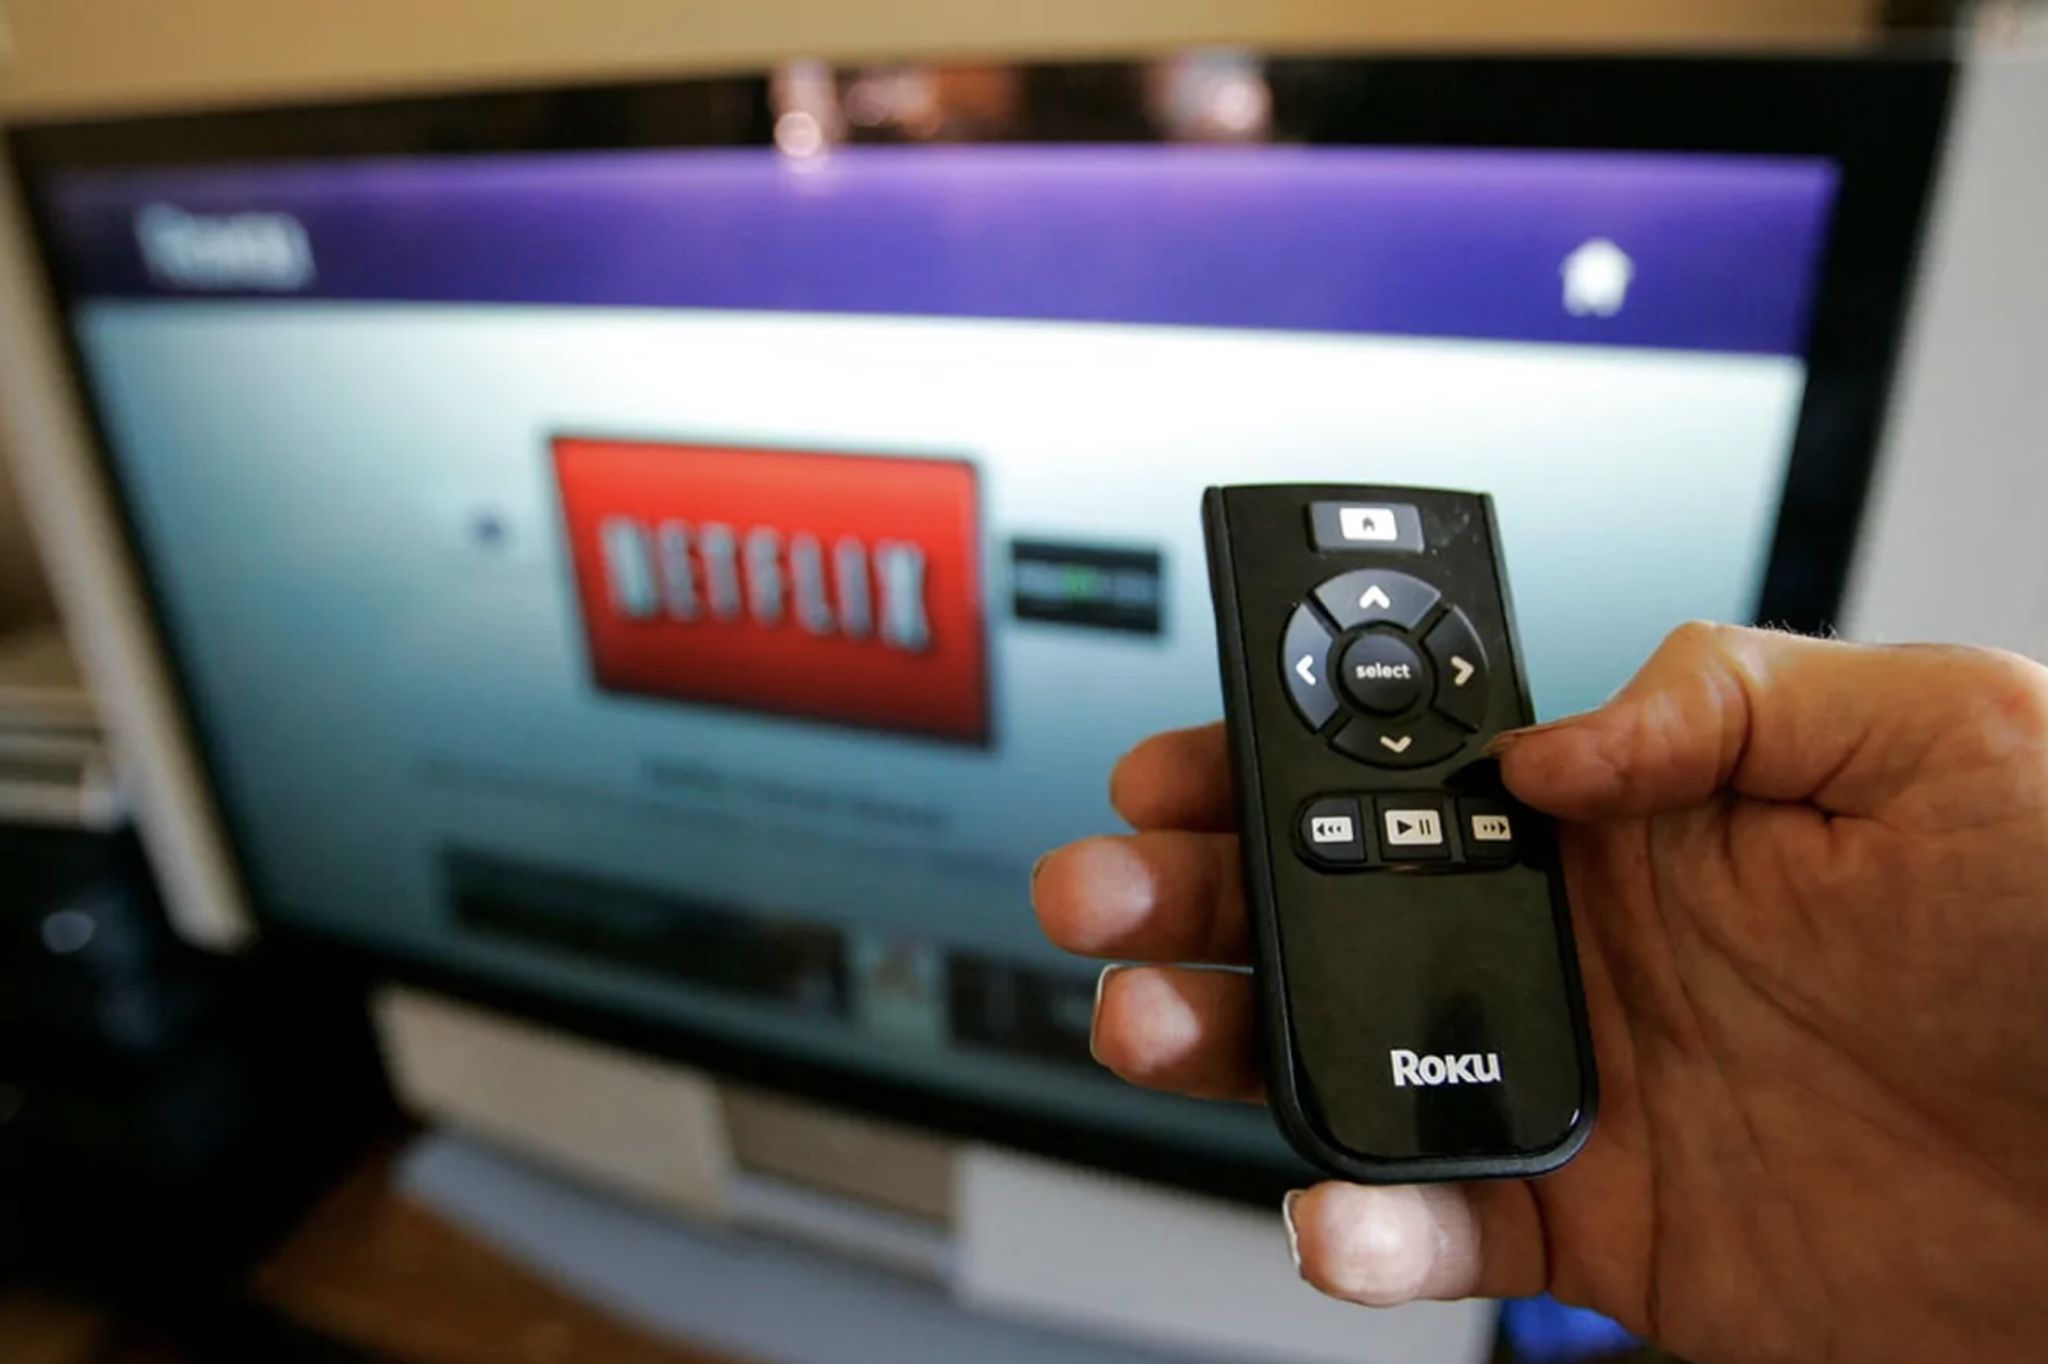 Netflix has stopped working on some TVs and other devices: which ones are affected?